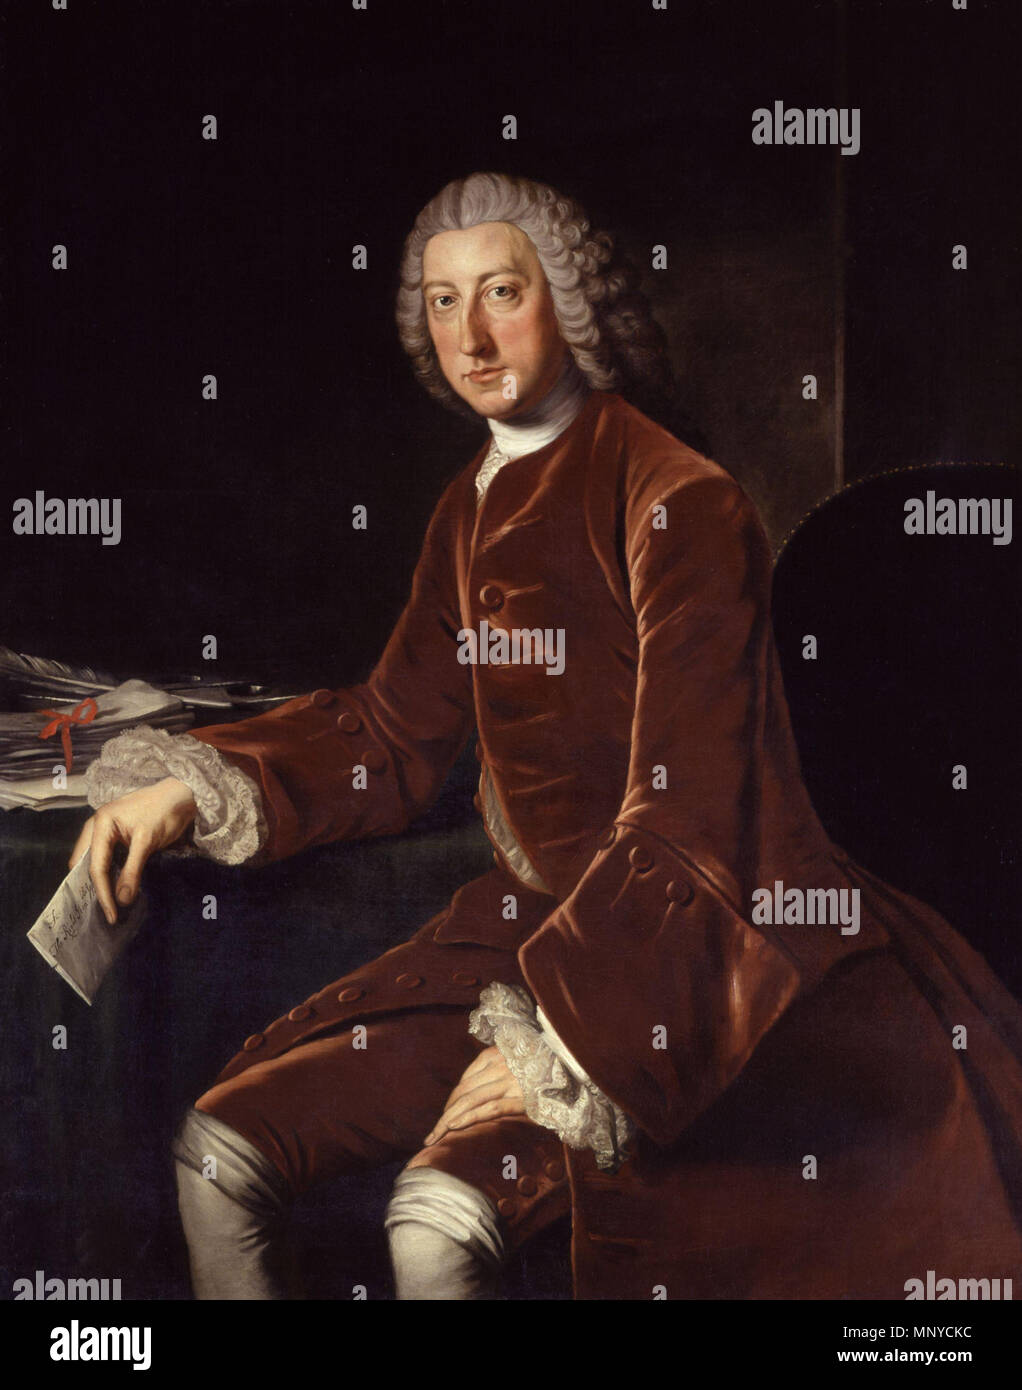 William Pitt, later First Earl of Chatham (1708–1778) .  English: Portrait of the British statesman William Pitt, 1st Earl of Chatham (1708–1778), at three-quarter length, grey wig falling behind shoulders; rich brown velvet suit, white cravat, shirt and wrist ruffles; on the table an inkstand, pen and papers, a letter in his right hand; brown interior background; lit from left. . circa 1754.   1267 William Pitt, 1st Earl of Chatham by William Hoare Stock Photo